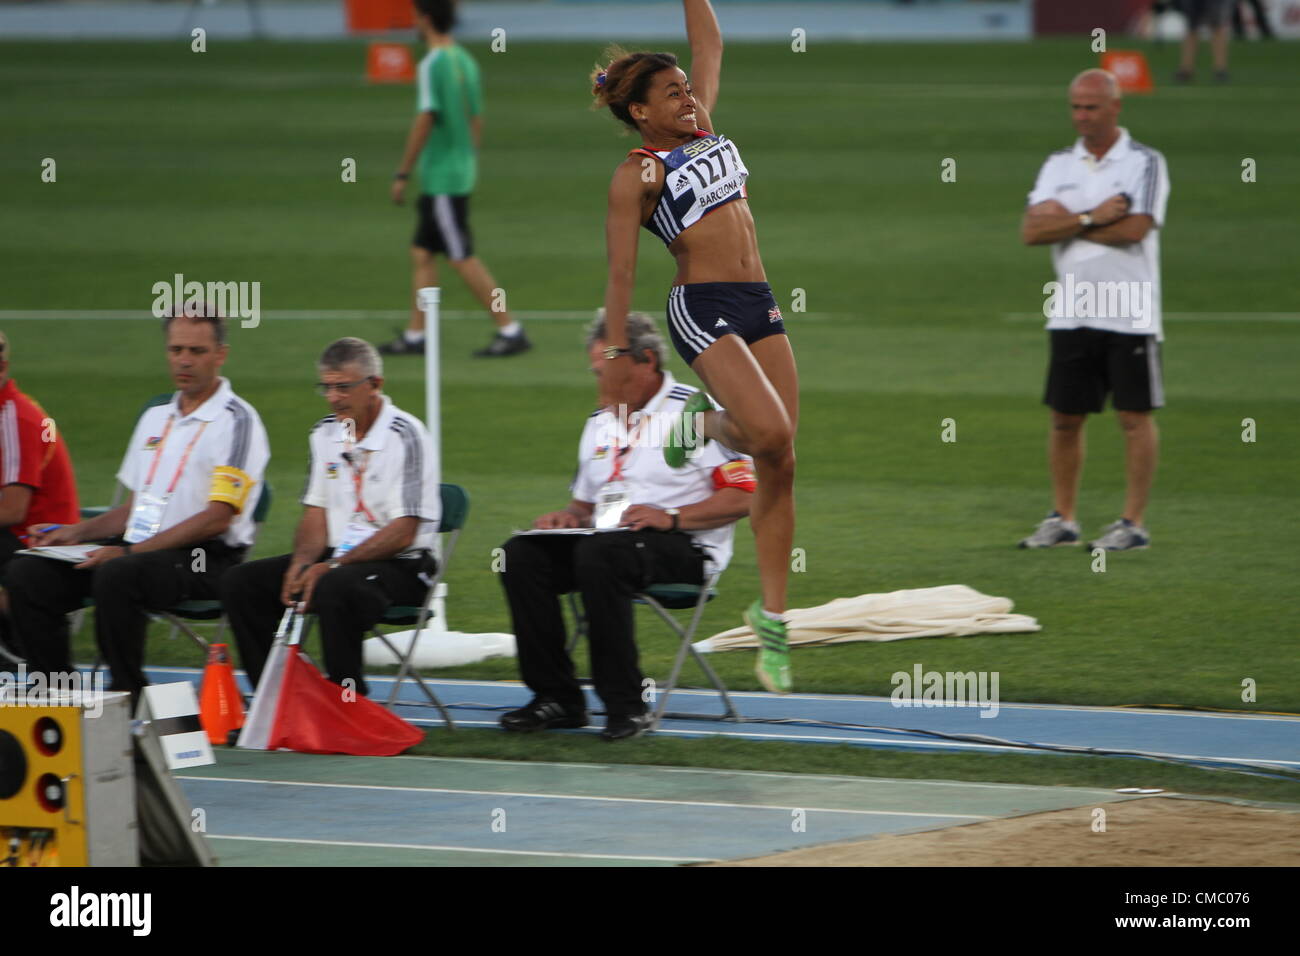 BARCELONA, SPAIN - JULY 13: Jazmin Sawyers from Great Britain win bronze medal in the long jump IAAF World Junior Championships on July 13, 2012 in Barcelona, Spain. Stock Photo